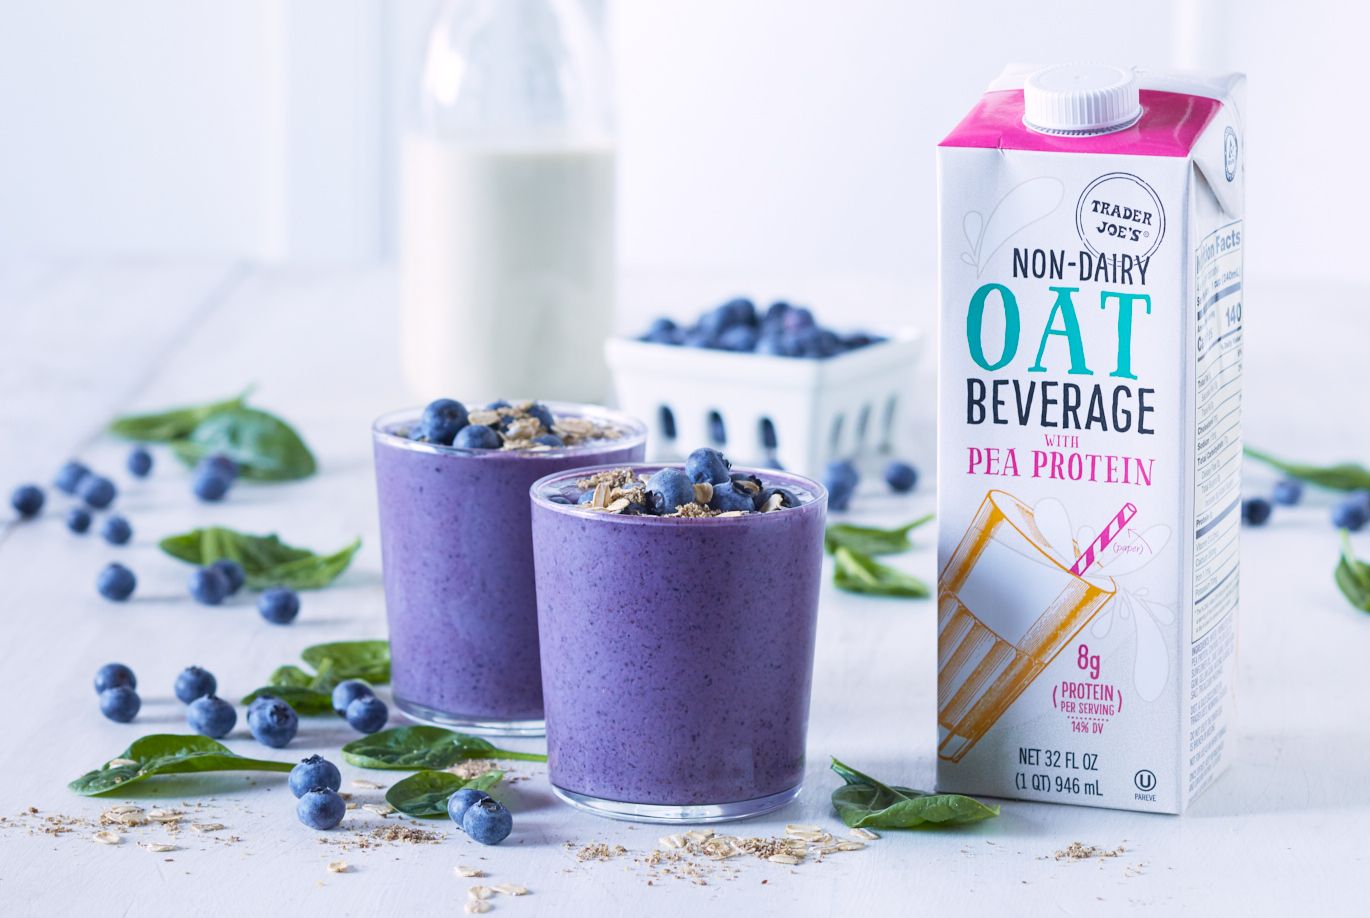 Trader Joe's Non-Dairy Oat Beverage with Pea Protein used in recipe for Blueberry Oat Protein Smoothie; in two glasses topped wtih fresh blueberries and oats; blueberries and spinach leaves on white surface